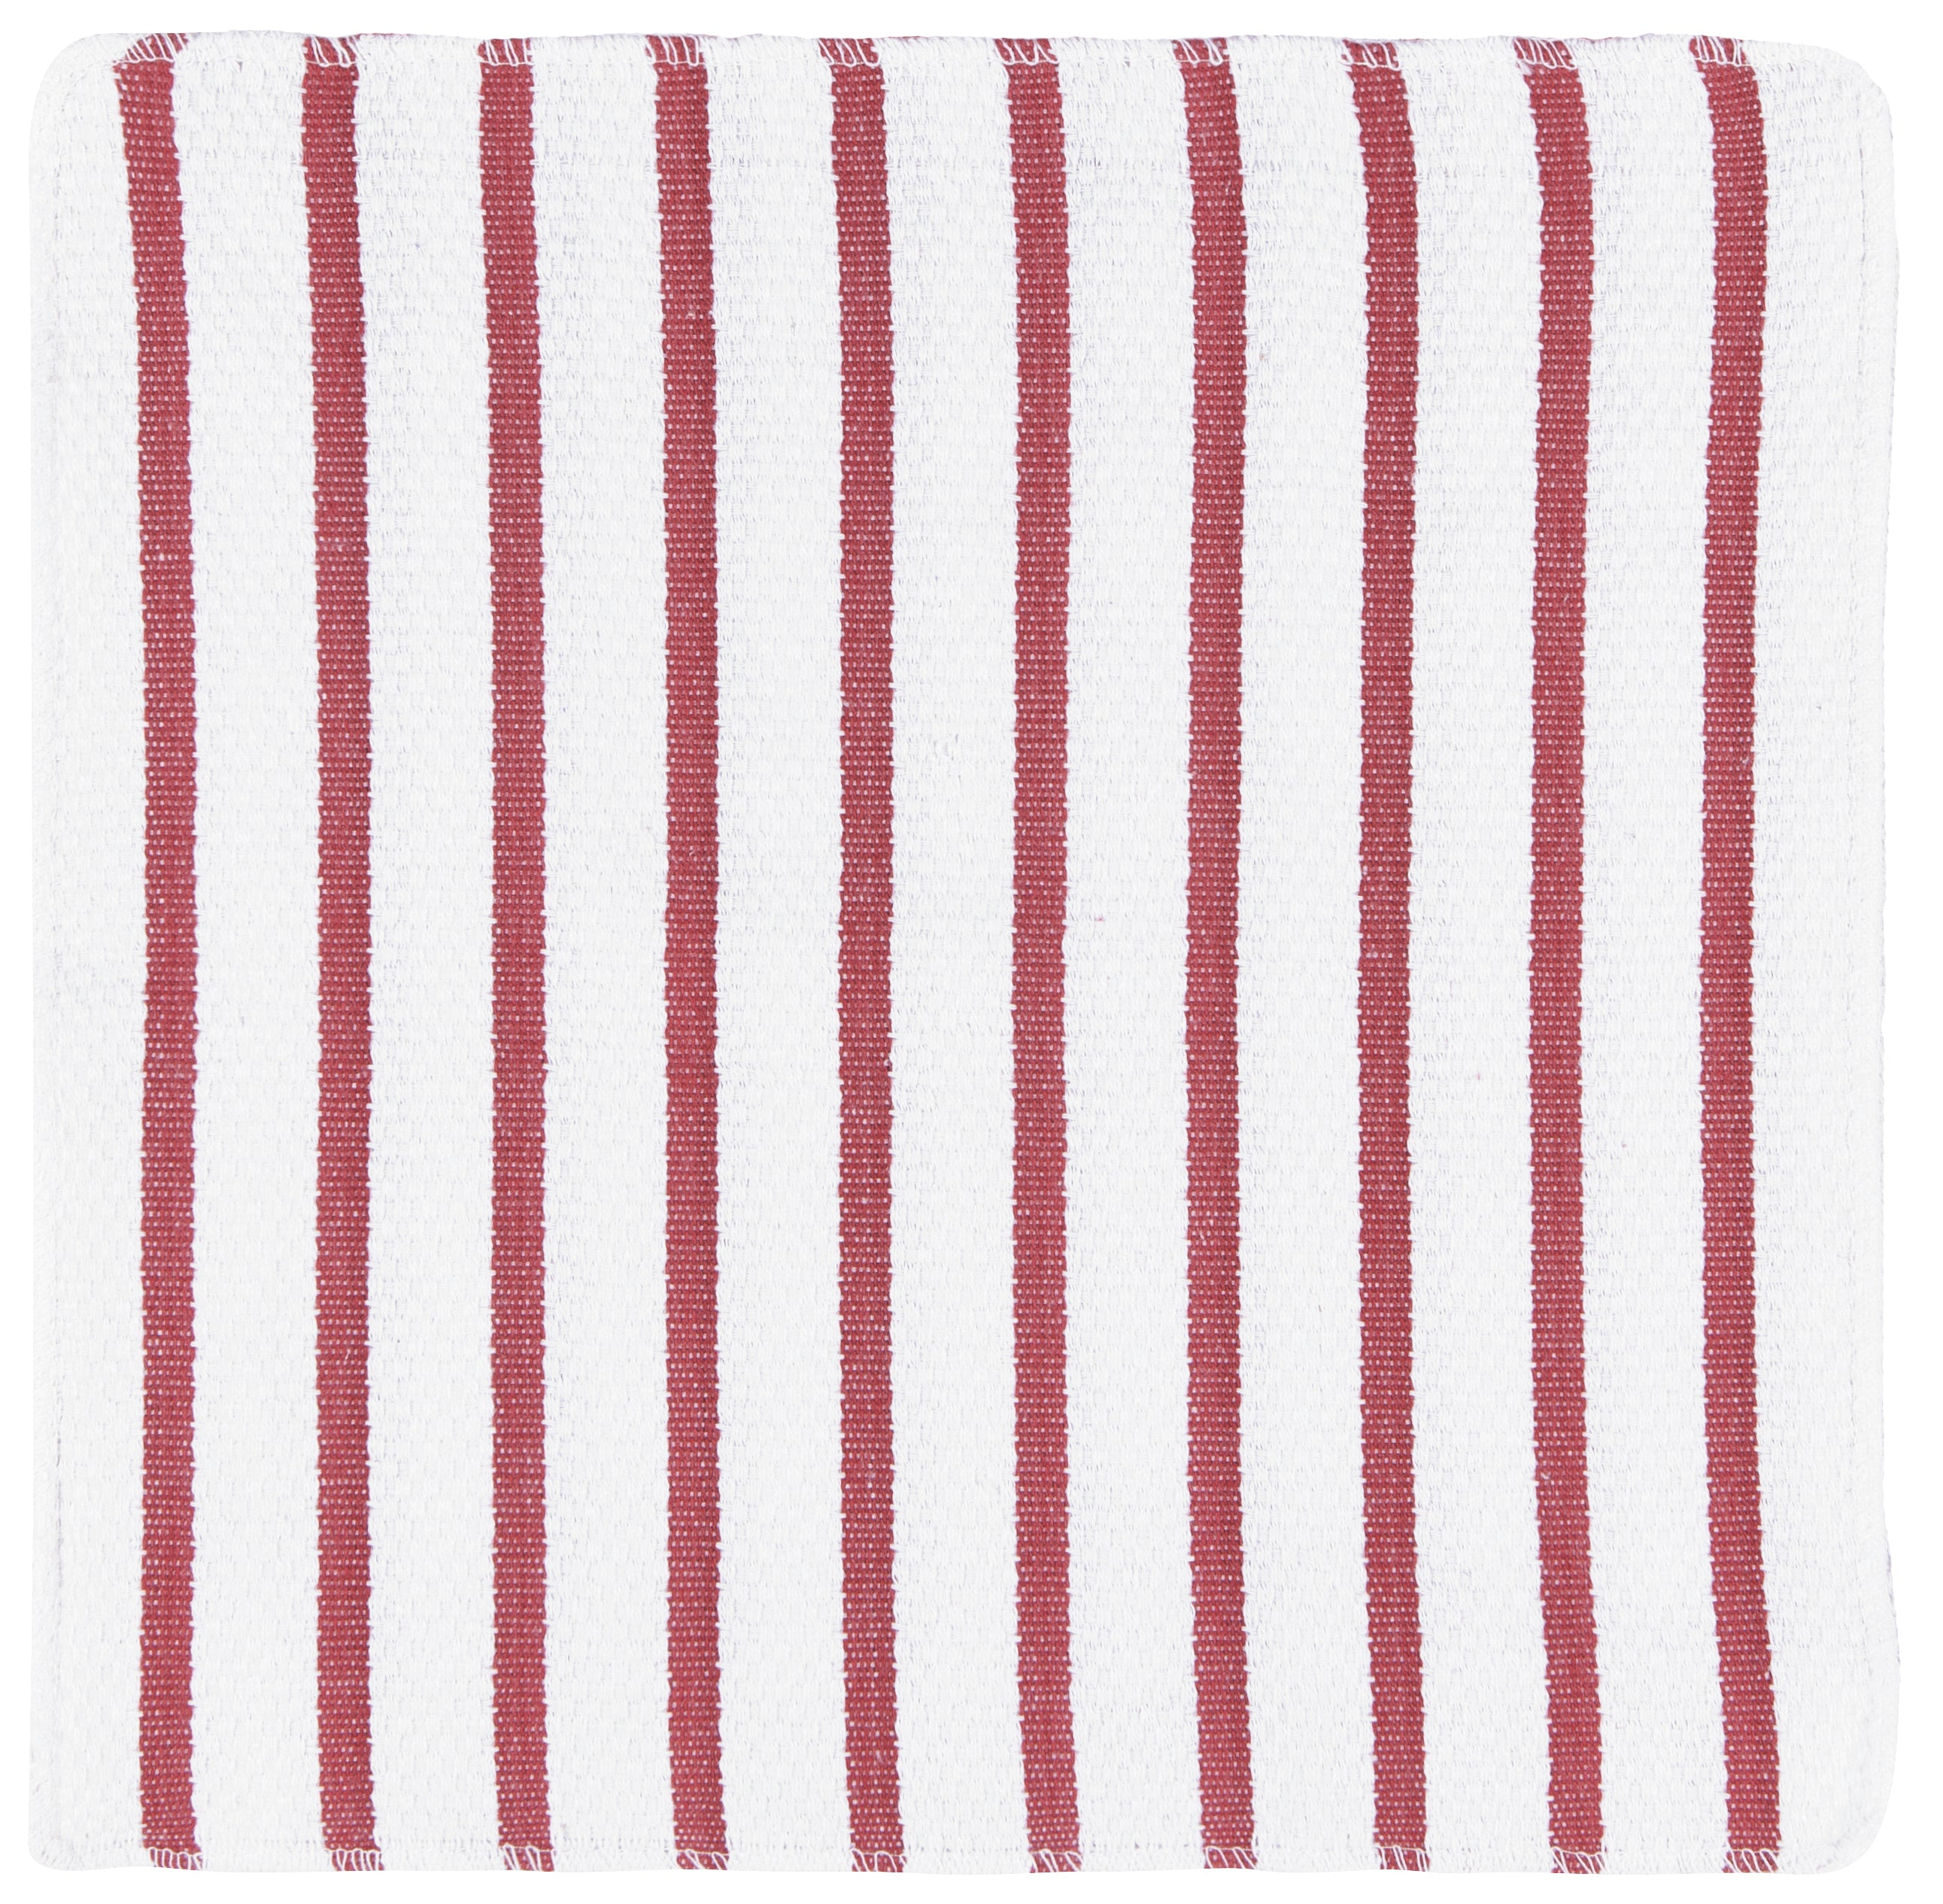 (White / Carmine Red) -- Basketweave Dishcloths, Set of 2  by Now Designs®